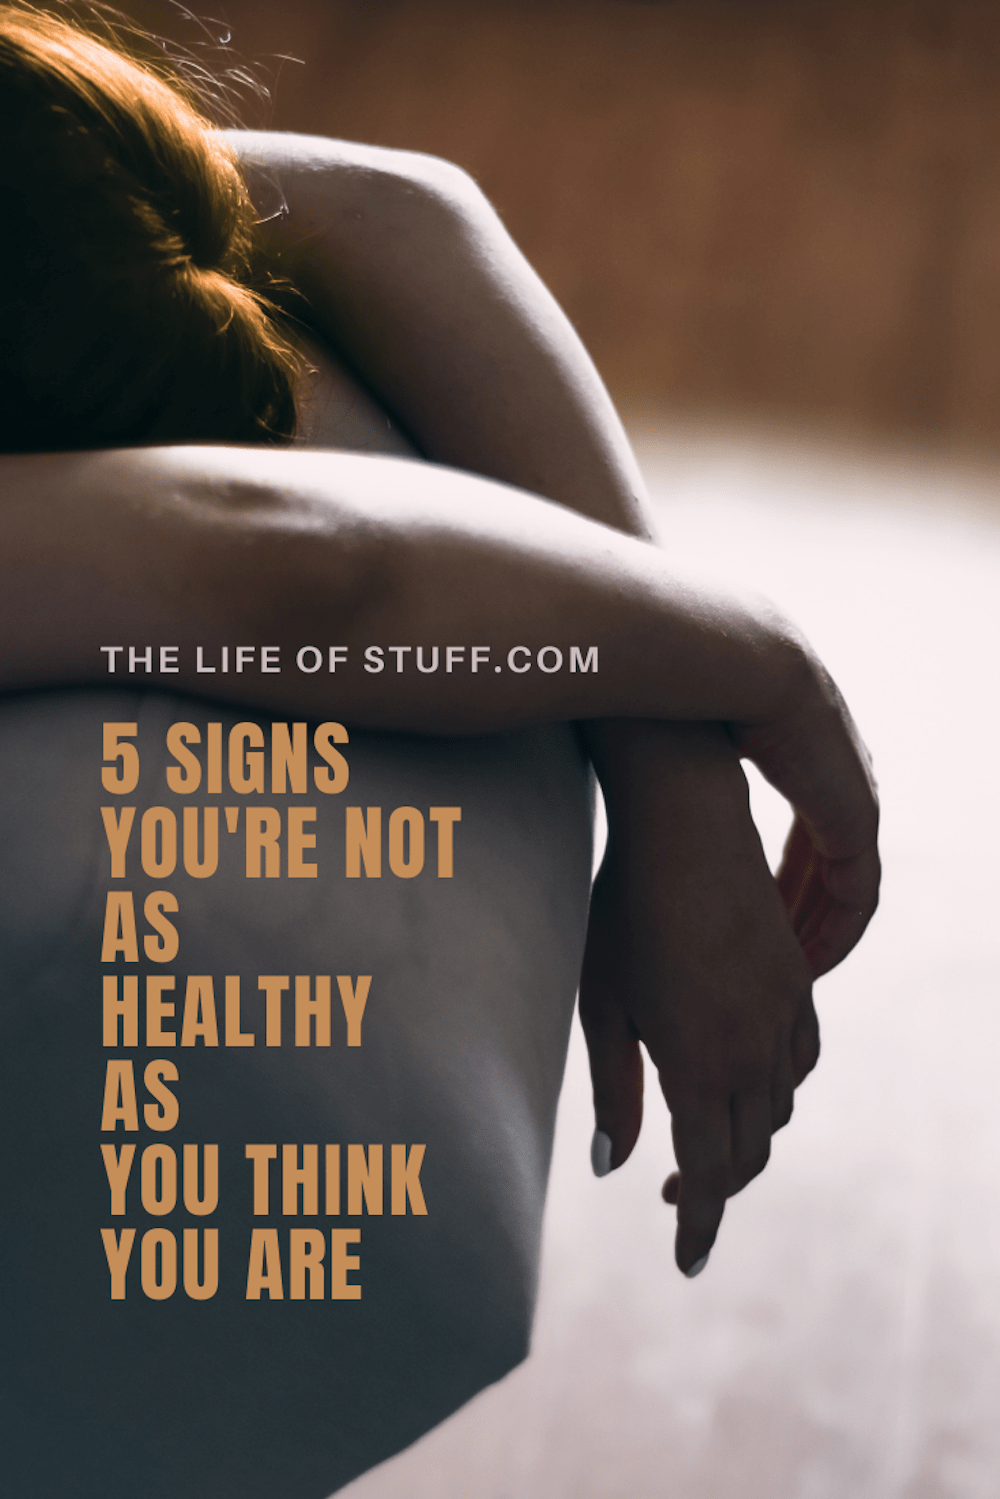 5 Signs You're Not As Healthy As You Think You Are - The Life of Stuff